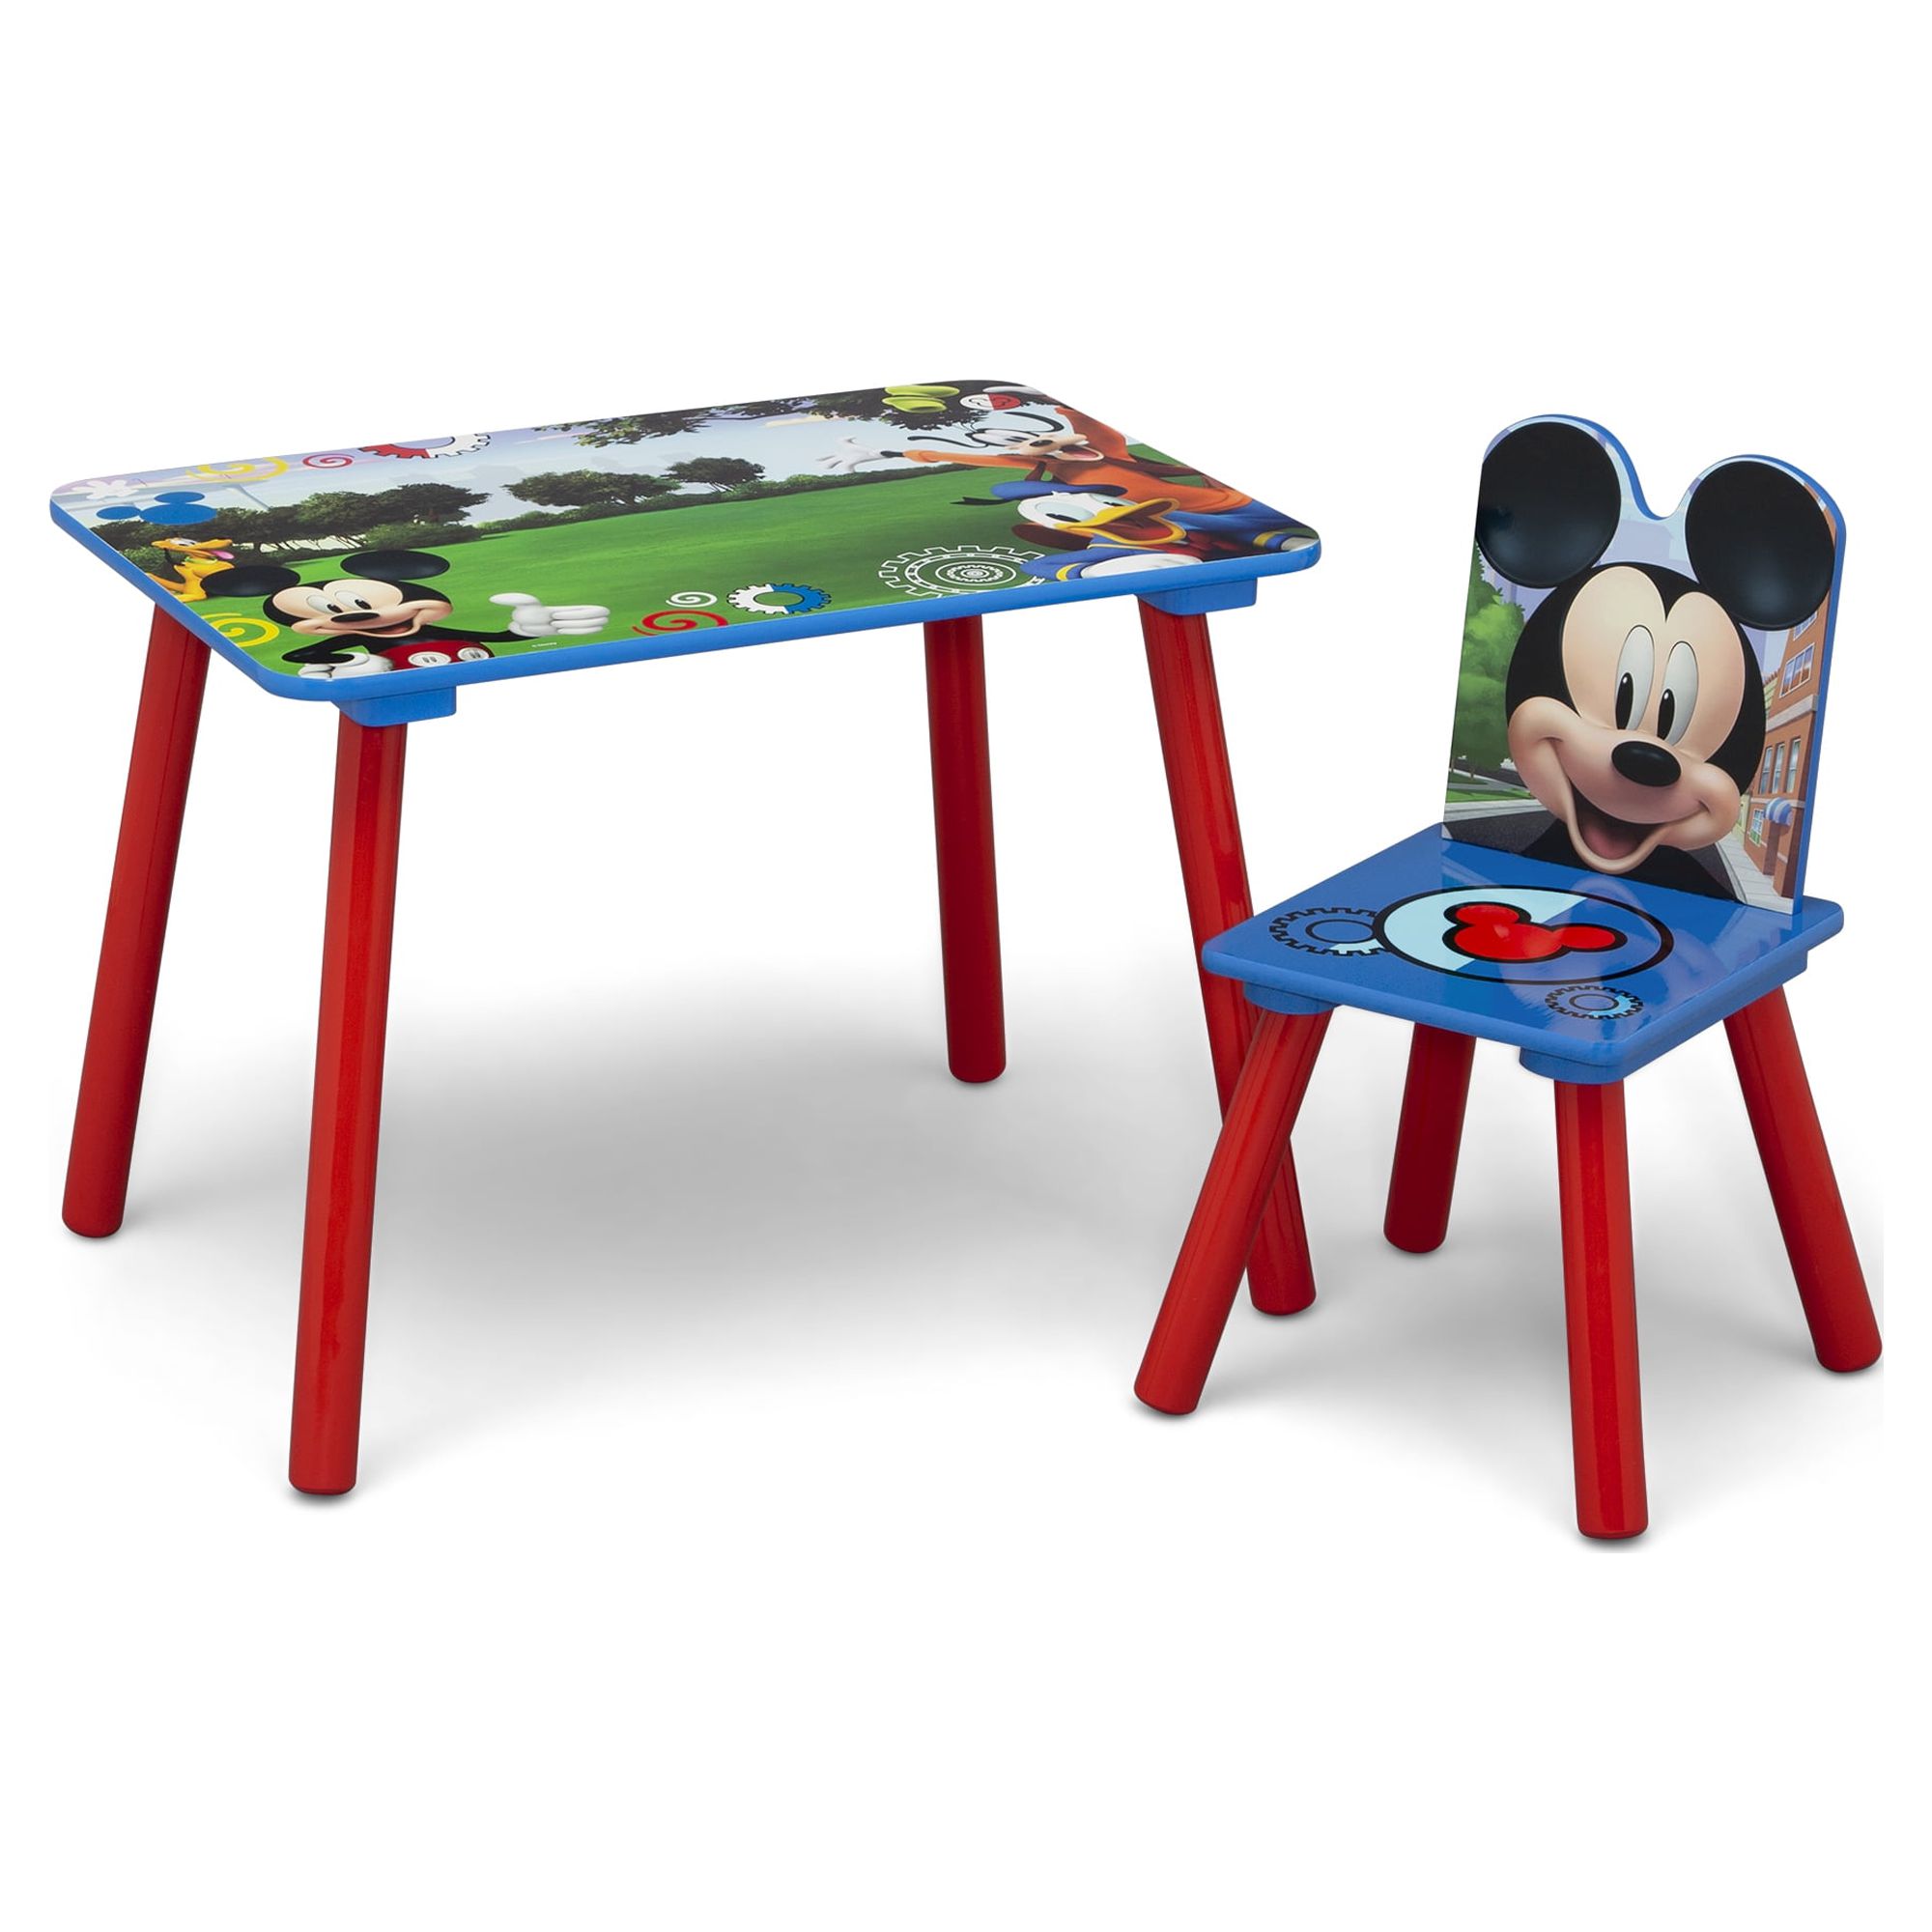 Disney Mickey Mouse 4-Piece Room-in-a-Box - Toddler Bedroom Set - image 16 of 20